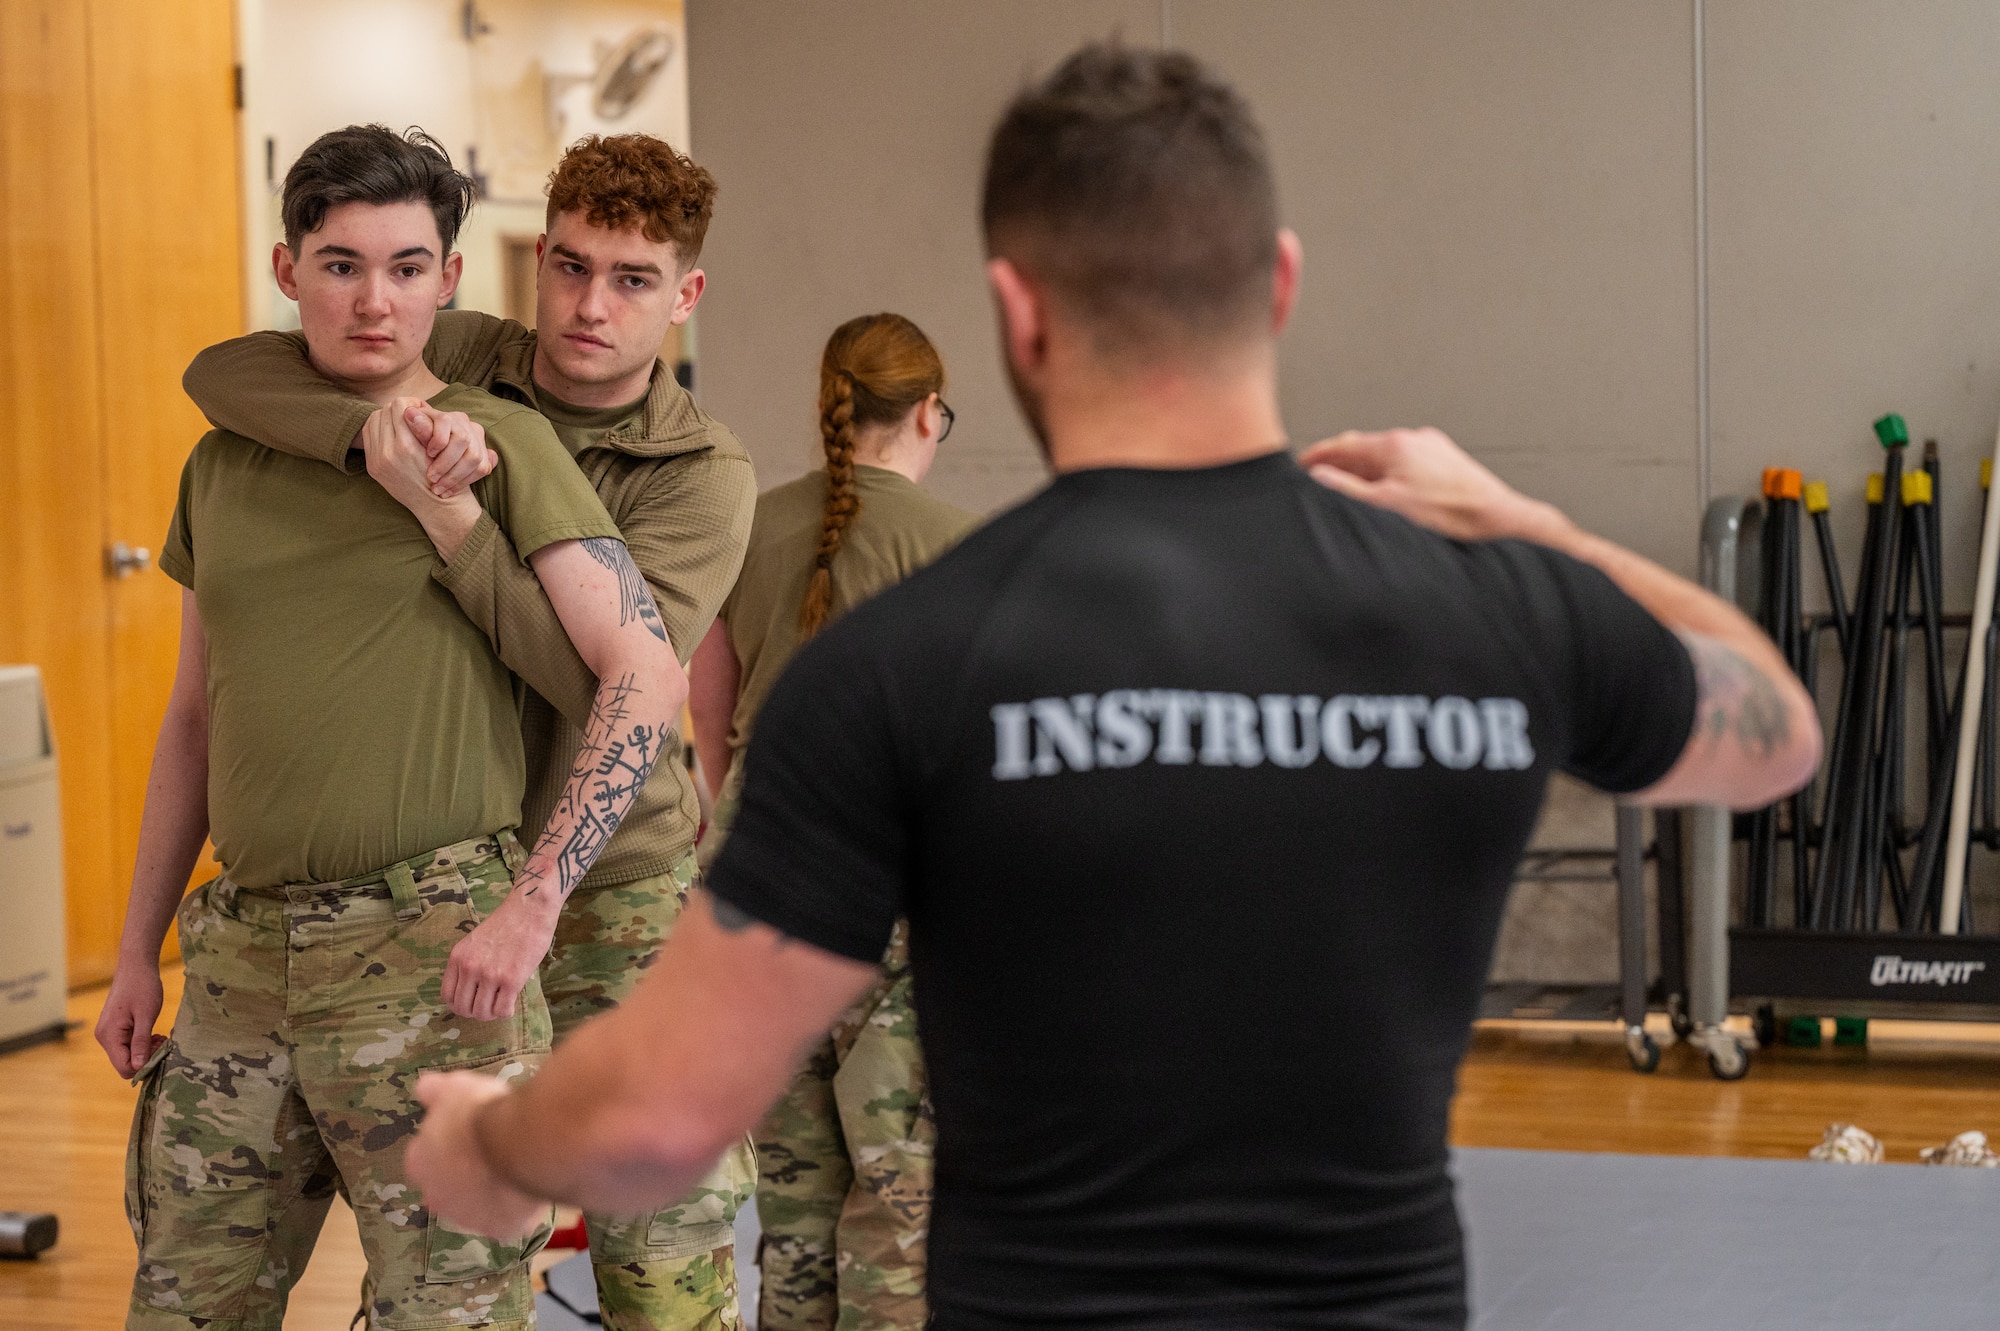 U.S. Air Force Senior Airman Jordan Smith, 621st Air Control Squadron weapons director, left, and Airman 1st Class Colin Rumping, 621st ACS weapons director, receive instructions on a combatives move from Staff Sgt. Kyle Virgillio, 5th Combat Communications Support Squadron master combatives instructor during a combatives instructor certification course at Osan Air Base, Republic of Korea, Feb. 23, 2024. Having the ability to become certified in combatives gives Airmen from the 51st Fighter Wing a more accessible way to become certified and grow as multi-capable Airmen. The 621st ACS impacts the “Fight Tonight” mission by supporting training and contingency operations of the 51st FW, providing lethal tactical battle management for the Air Component Commander during armistice and war. (U.S. Air Force photo by Airman 1st Class Chase Verzaal)